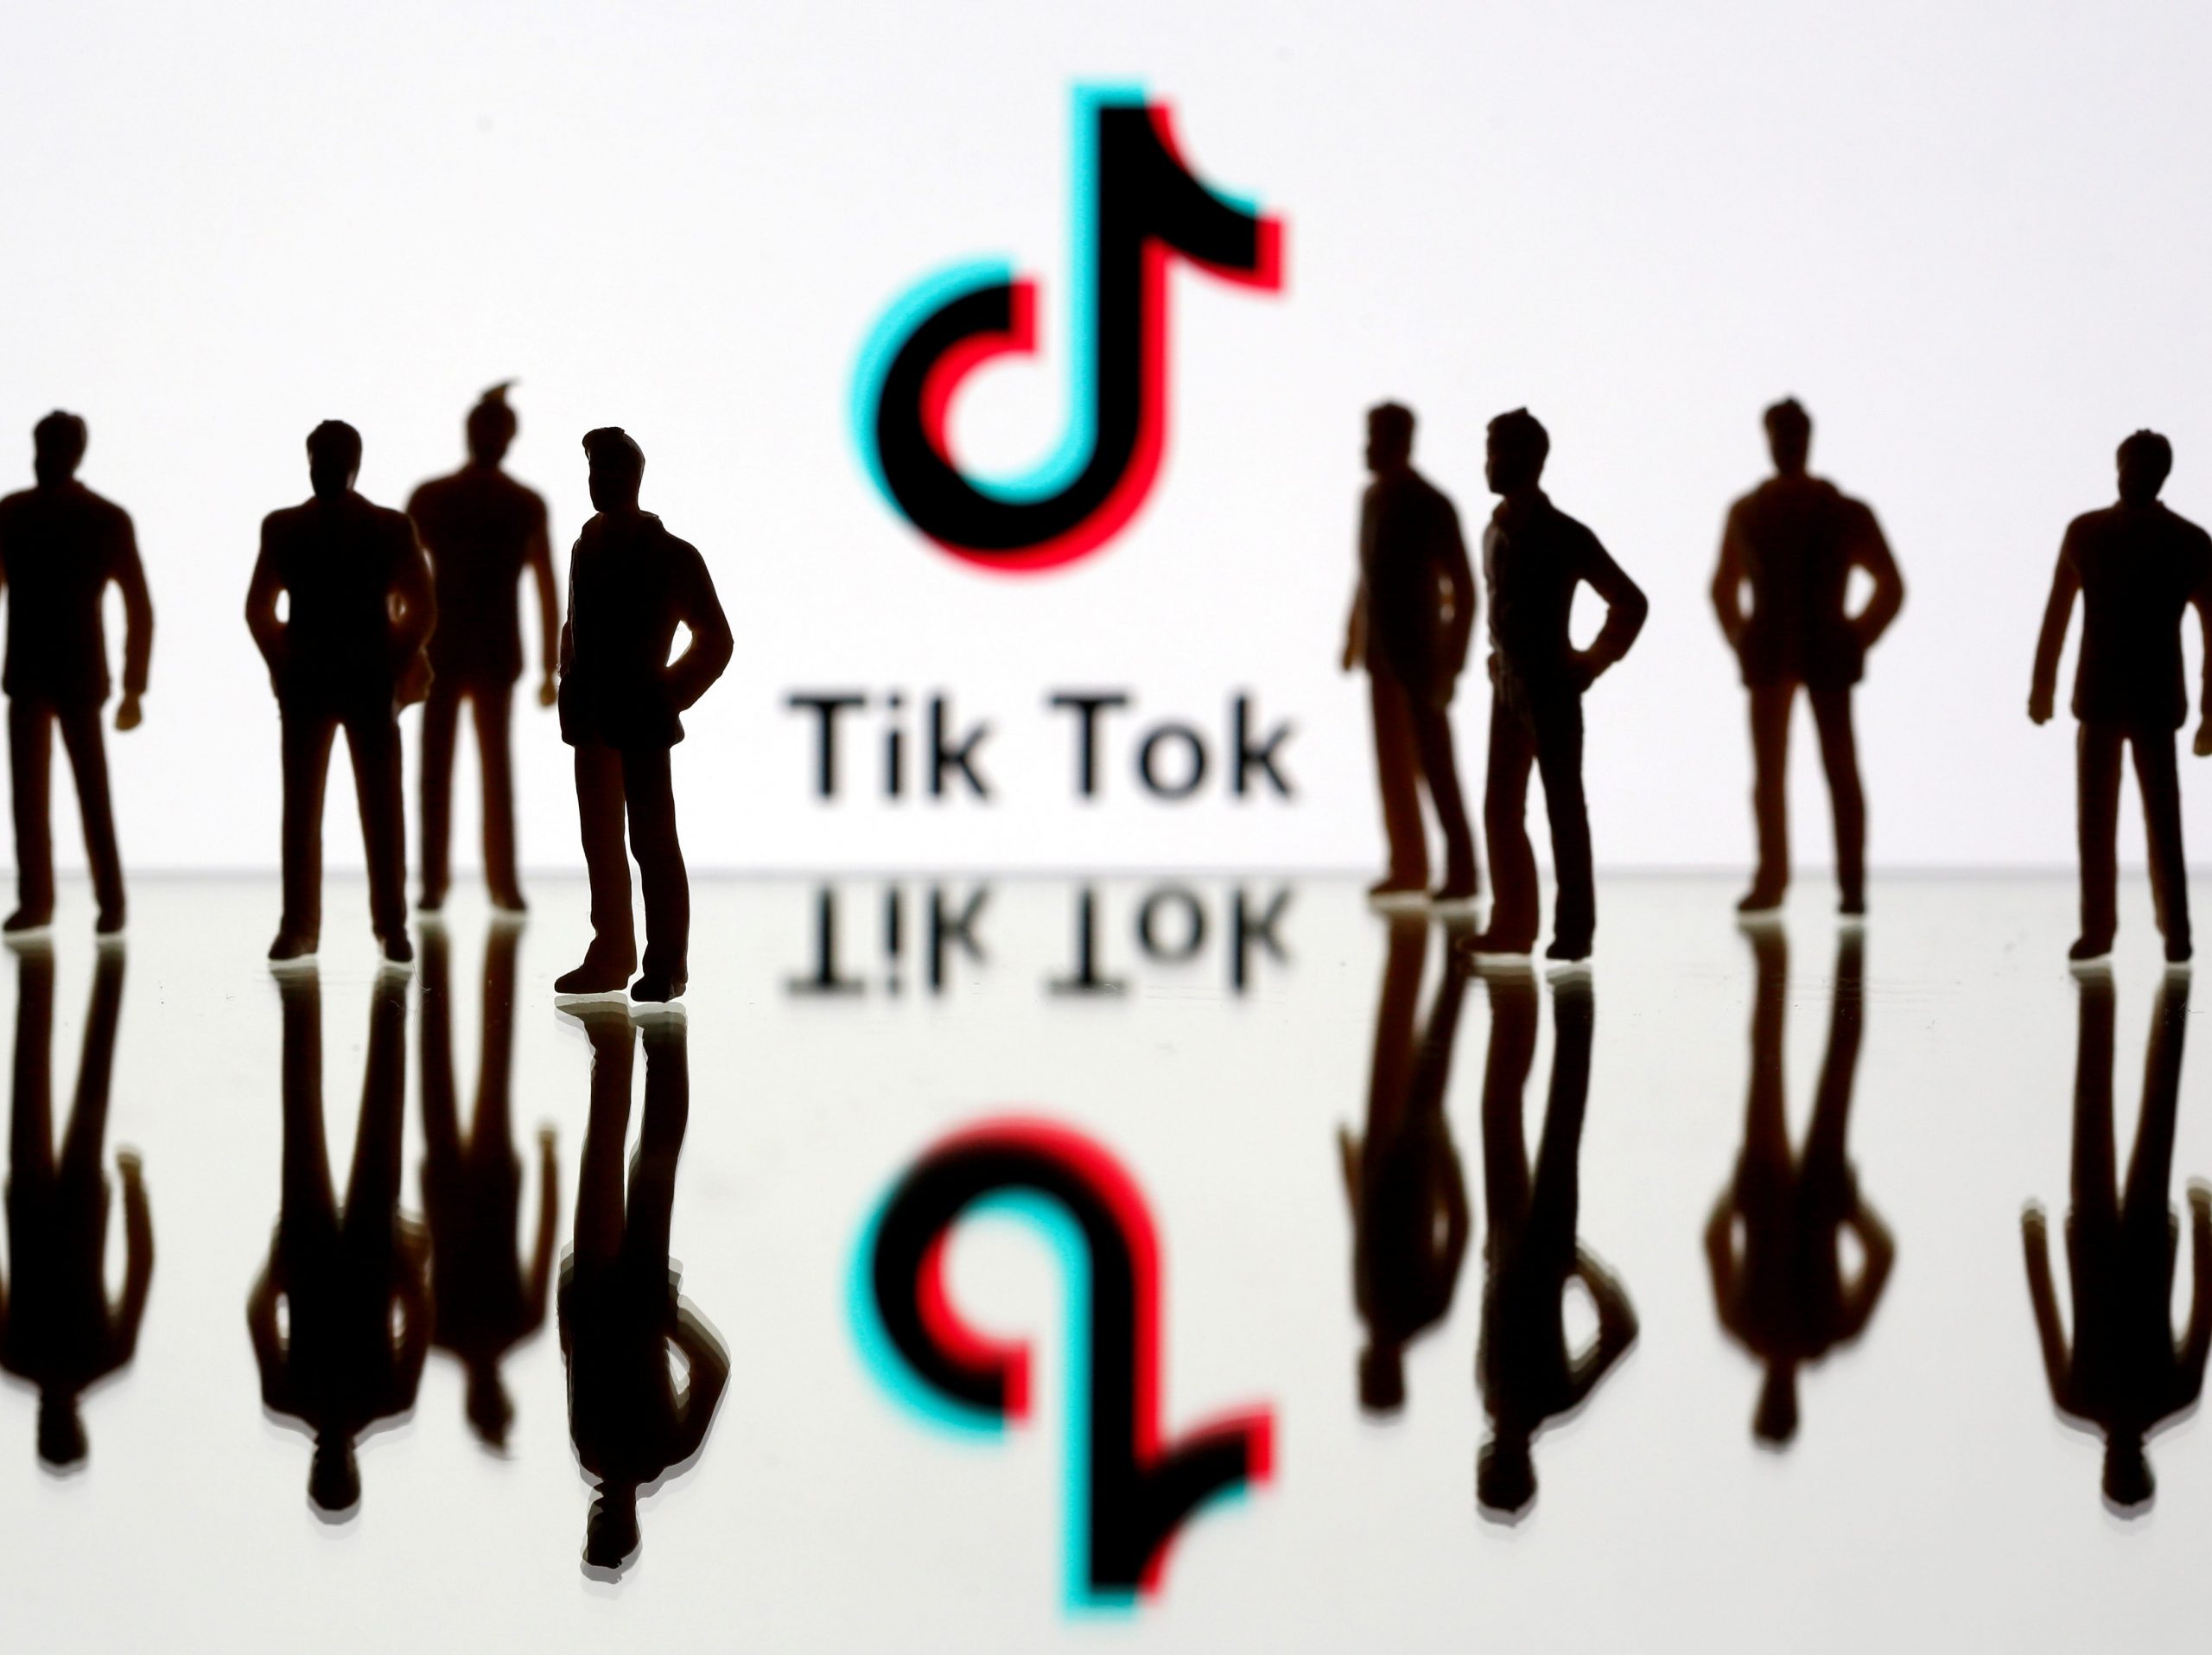 FILE PHOTO: A 3-D printed figures are seen in front of displayed Tik Tok logo in this picture illustration taken November 7, 2019. REUTERS/Dado Ruvic/Illustration/File Photo